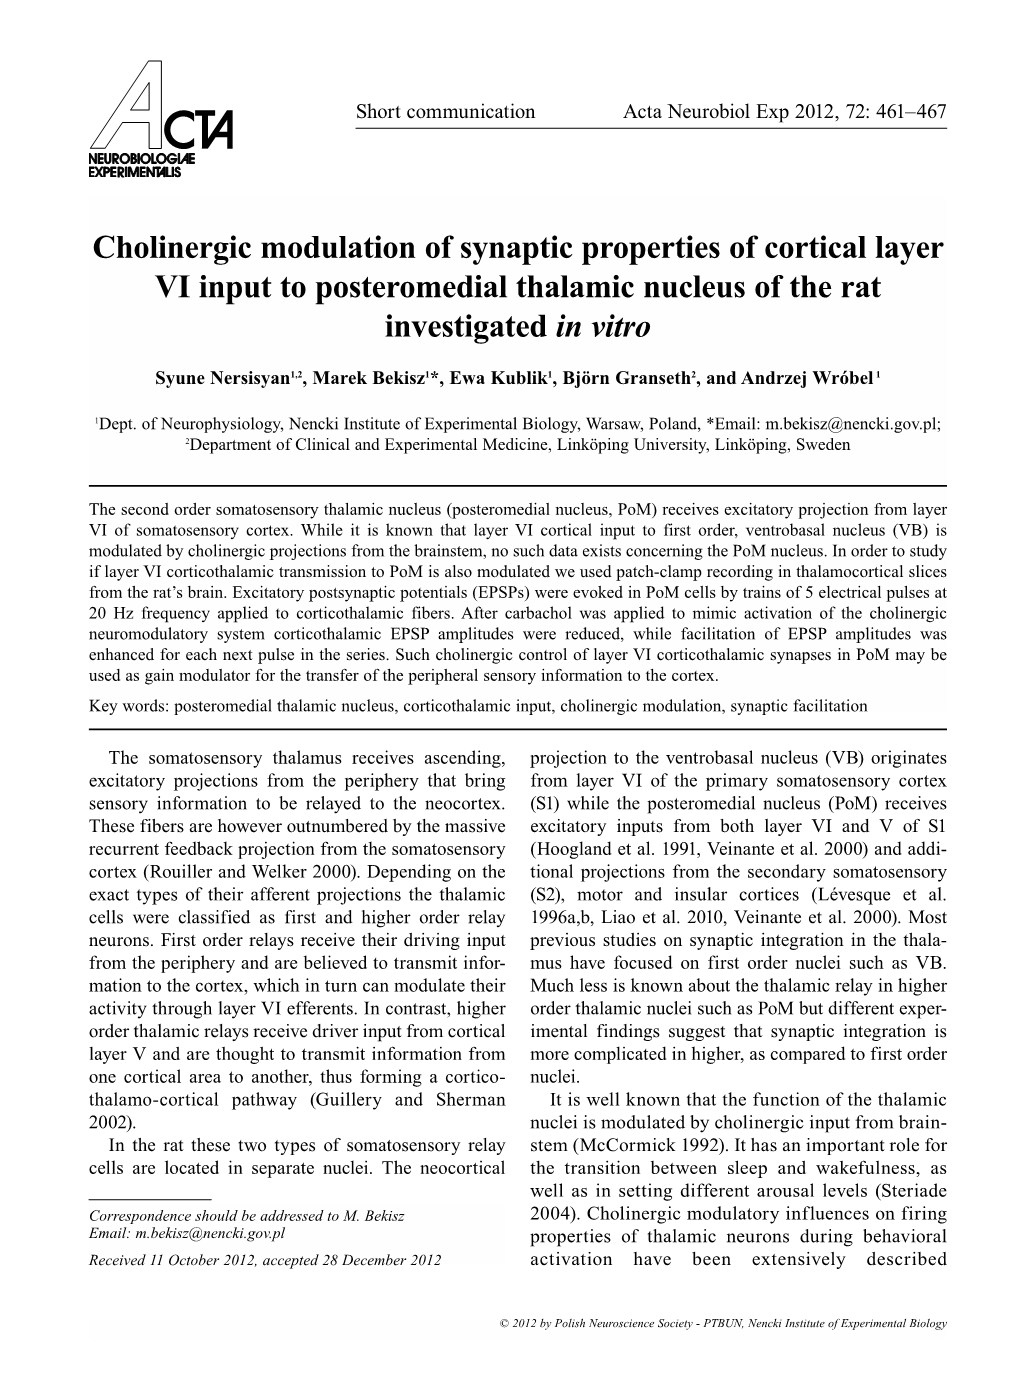 Cholinergic Modulation of Synaptic Properties of Cortical Layer VI Input to Posteromedial Thalamic Nucleus of the Rat Investigated in Vitro